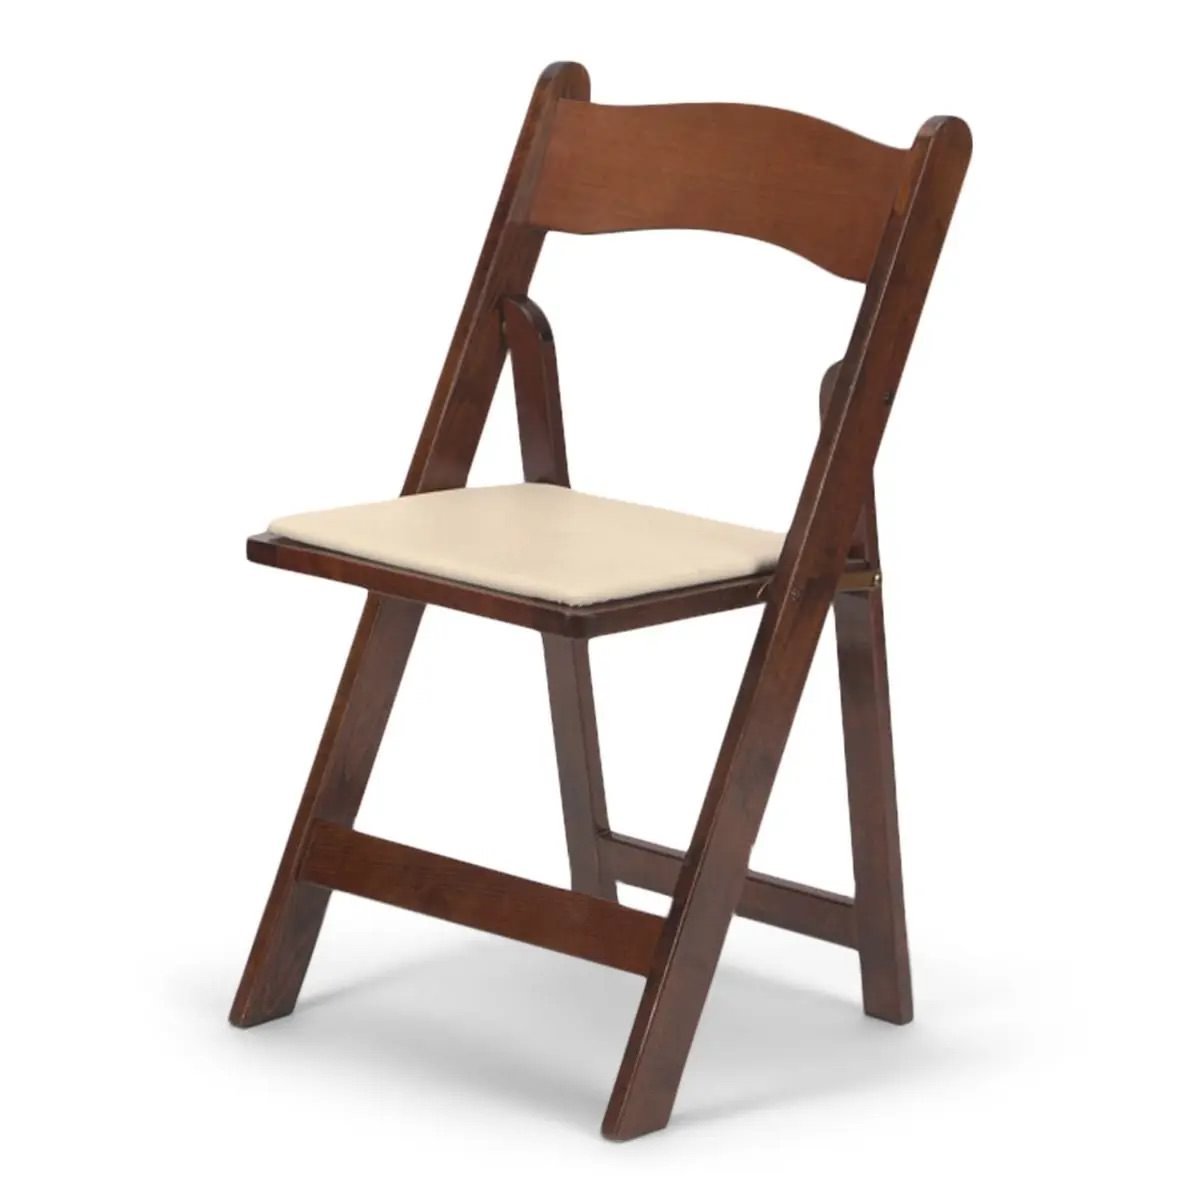 brown-folding-fruitwood-chairs-with-padding-hughes-event-rentals-charleston-sc3.jpeg